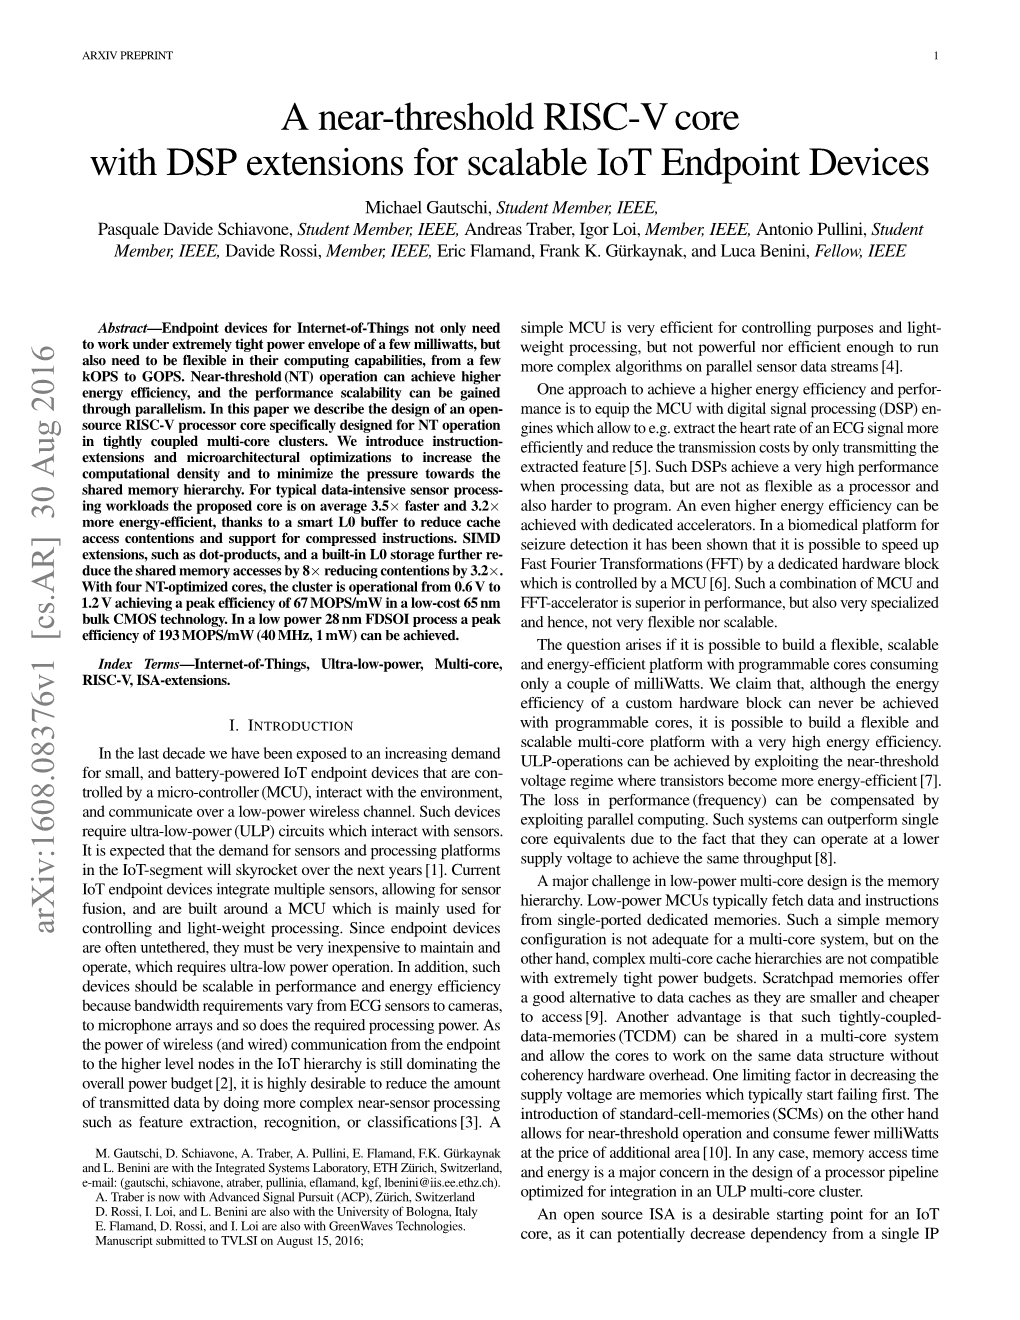 A Near-Threshold RISC-V Core with DSP Extensions for Scalable Iot